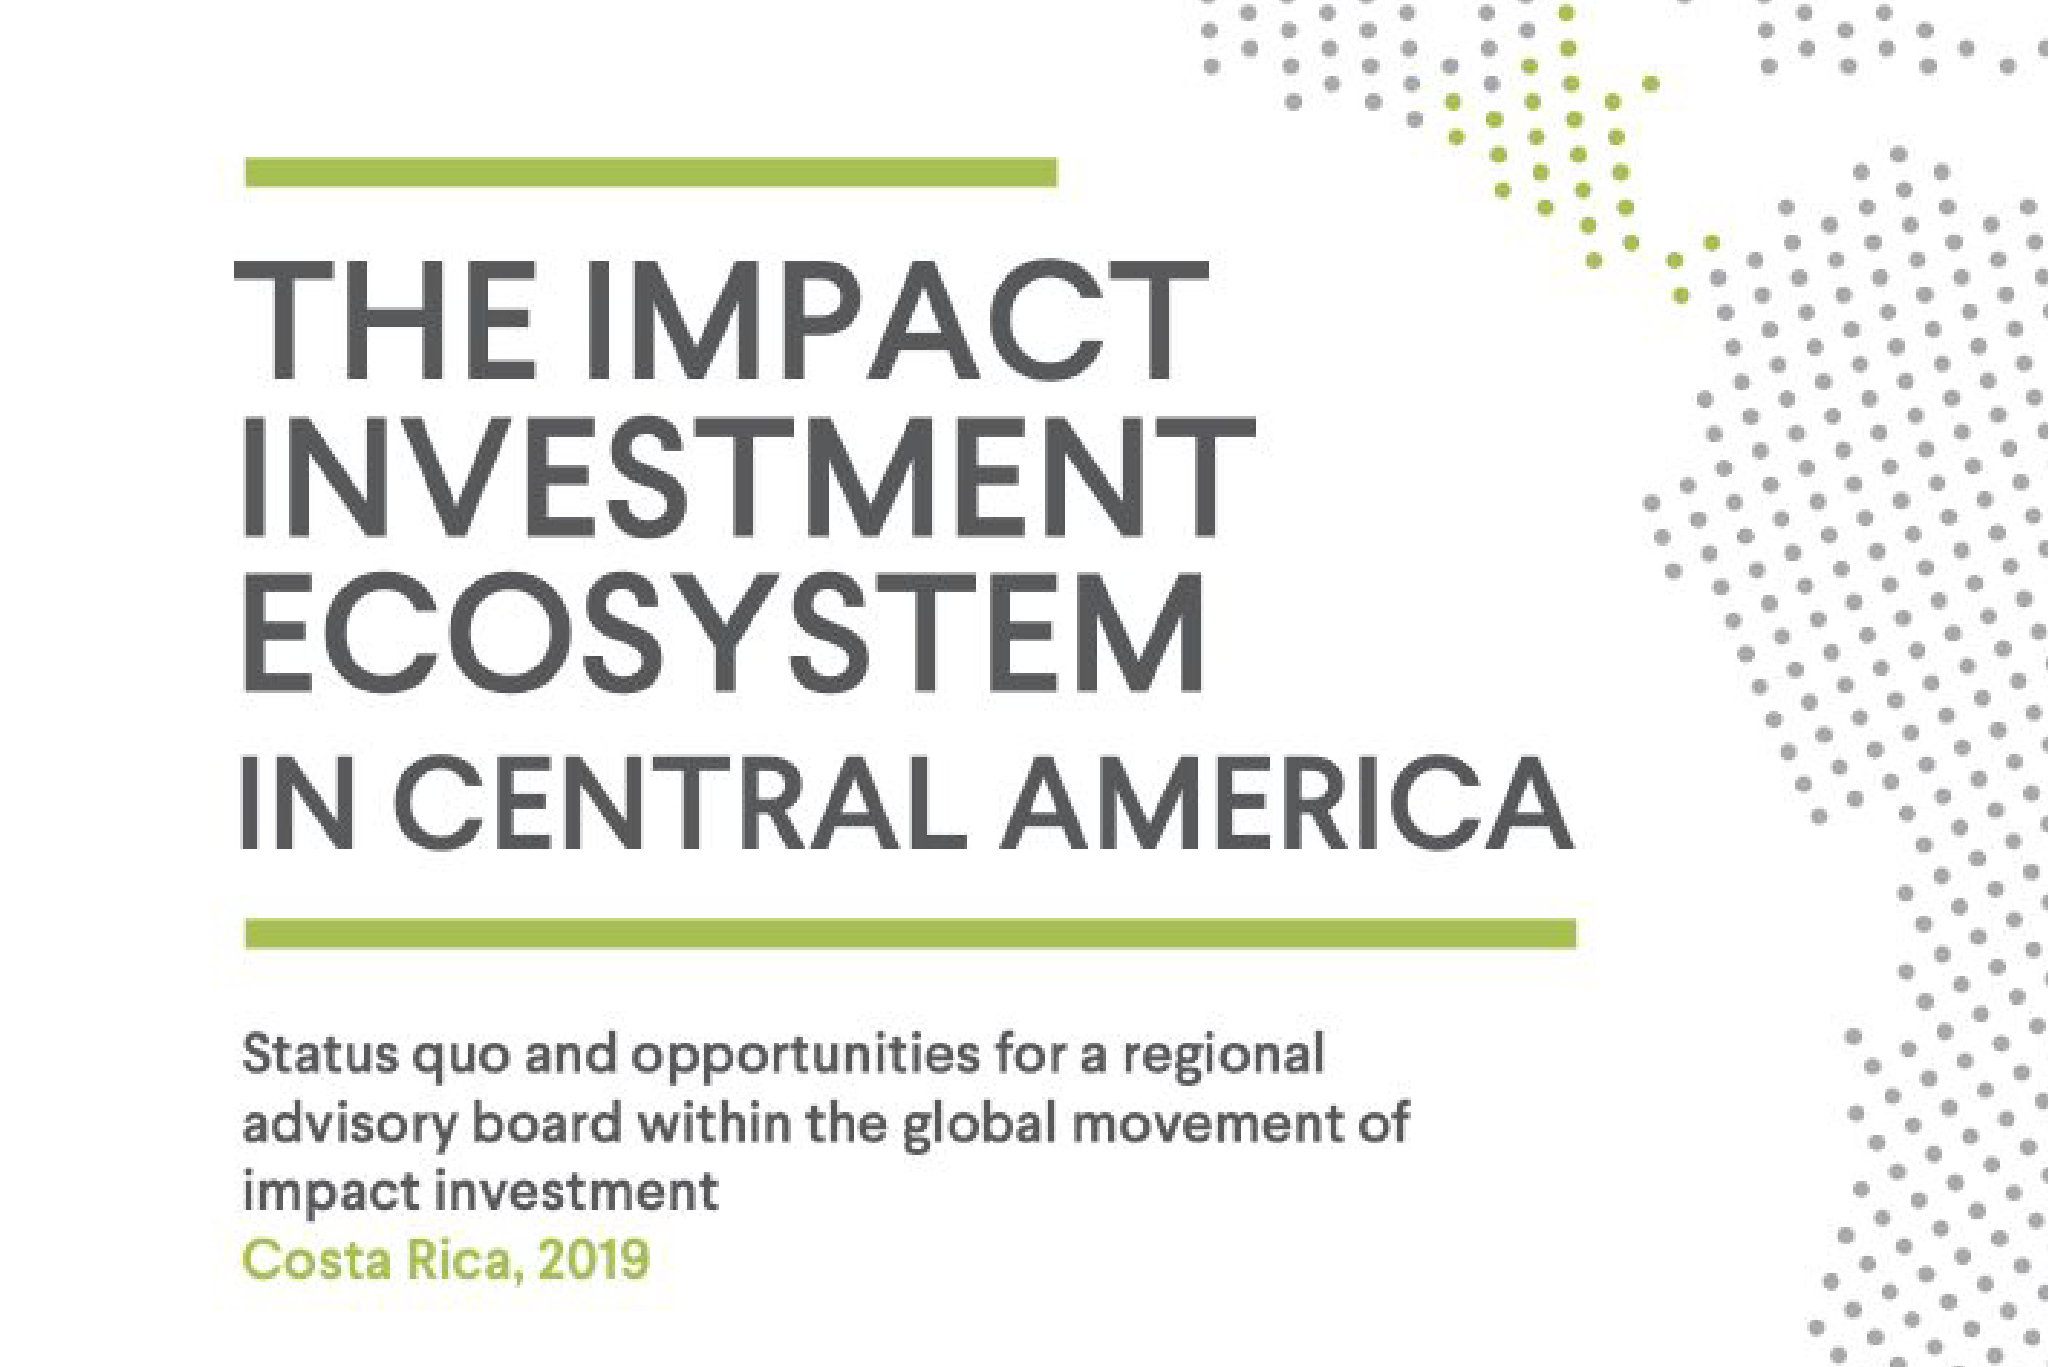 The Impact Investment Ecosystem in Central America